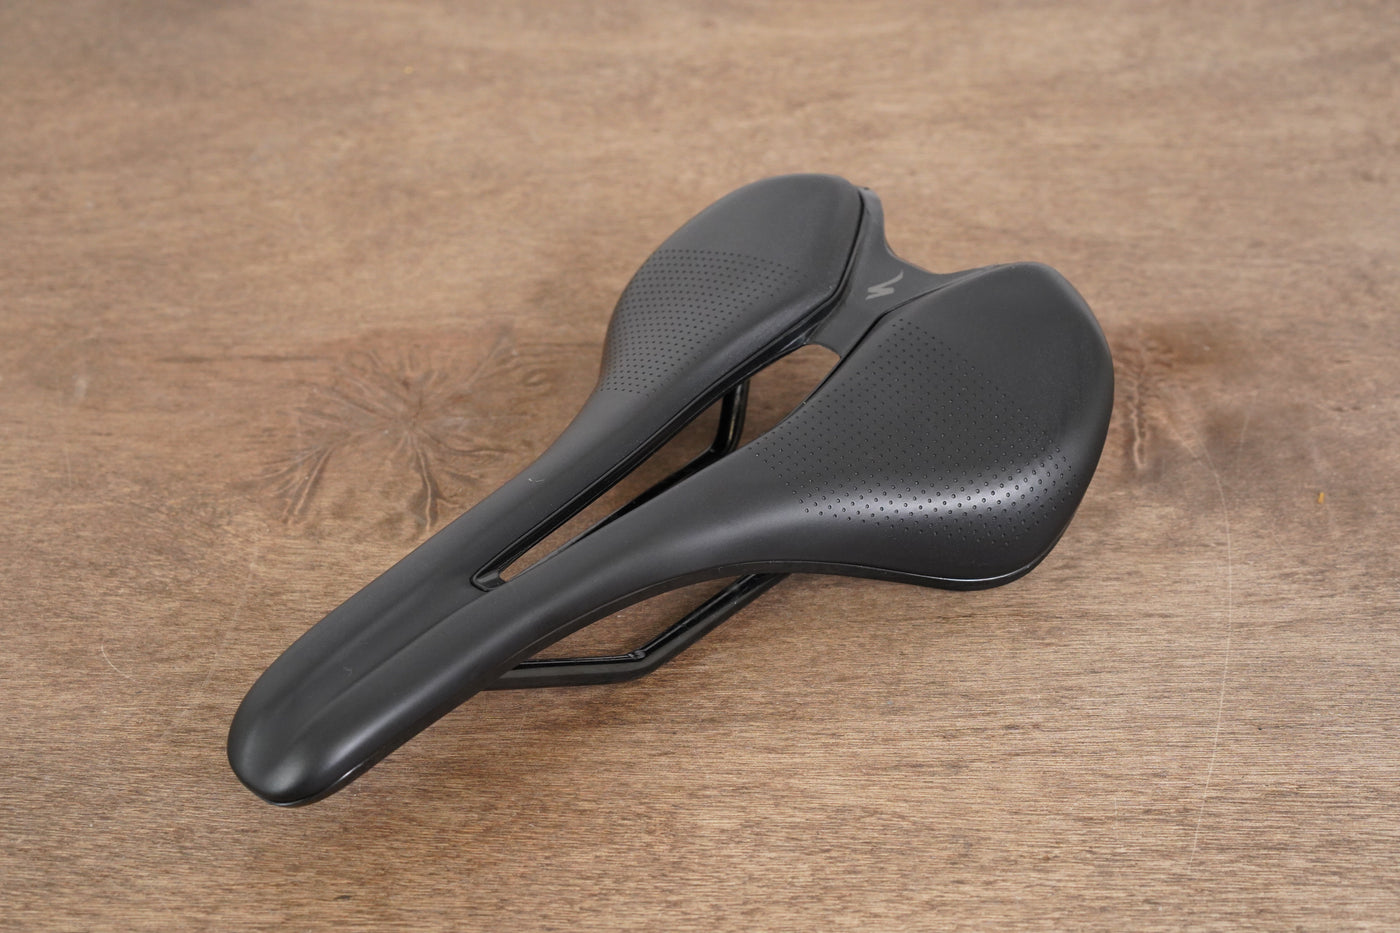 155mm Specialized Romin Evo Comp Cr-Mo Rail Road Saddle 275g